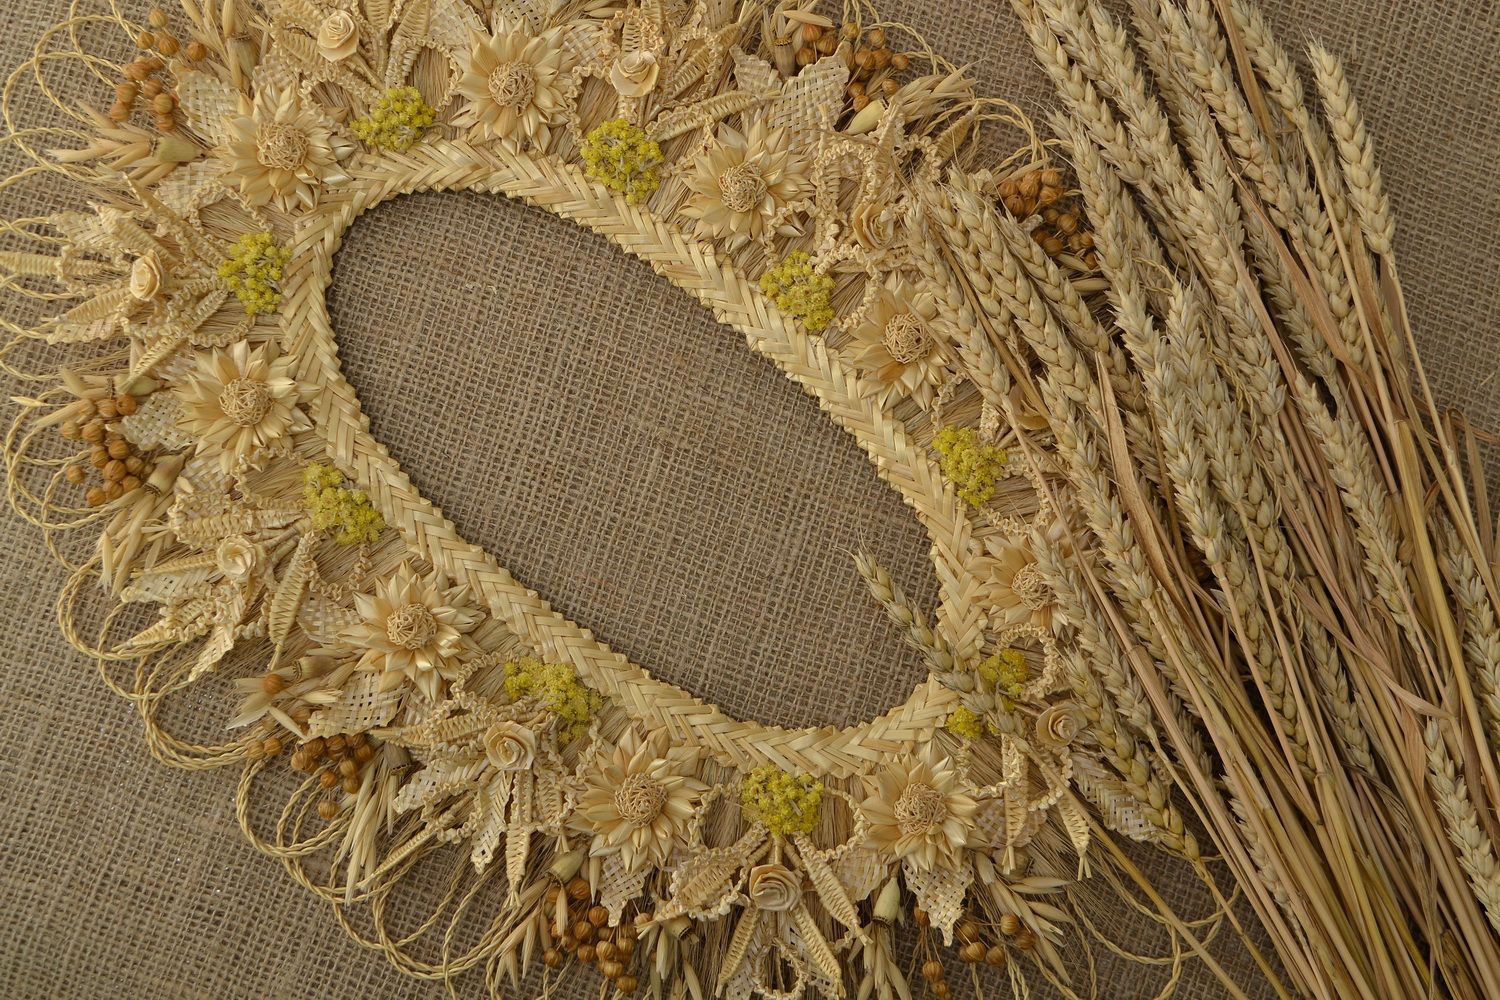 Oval family amulet made of straw photo 3